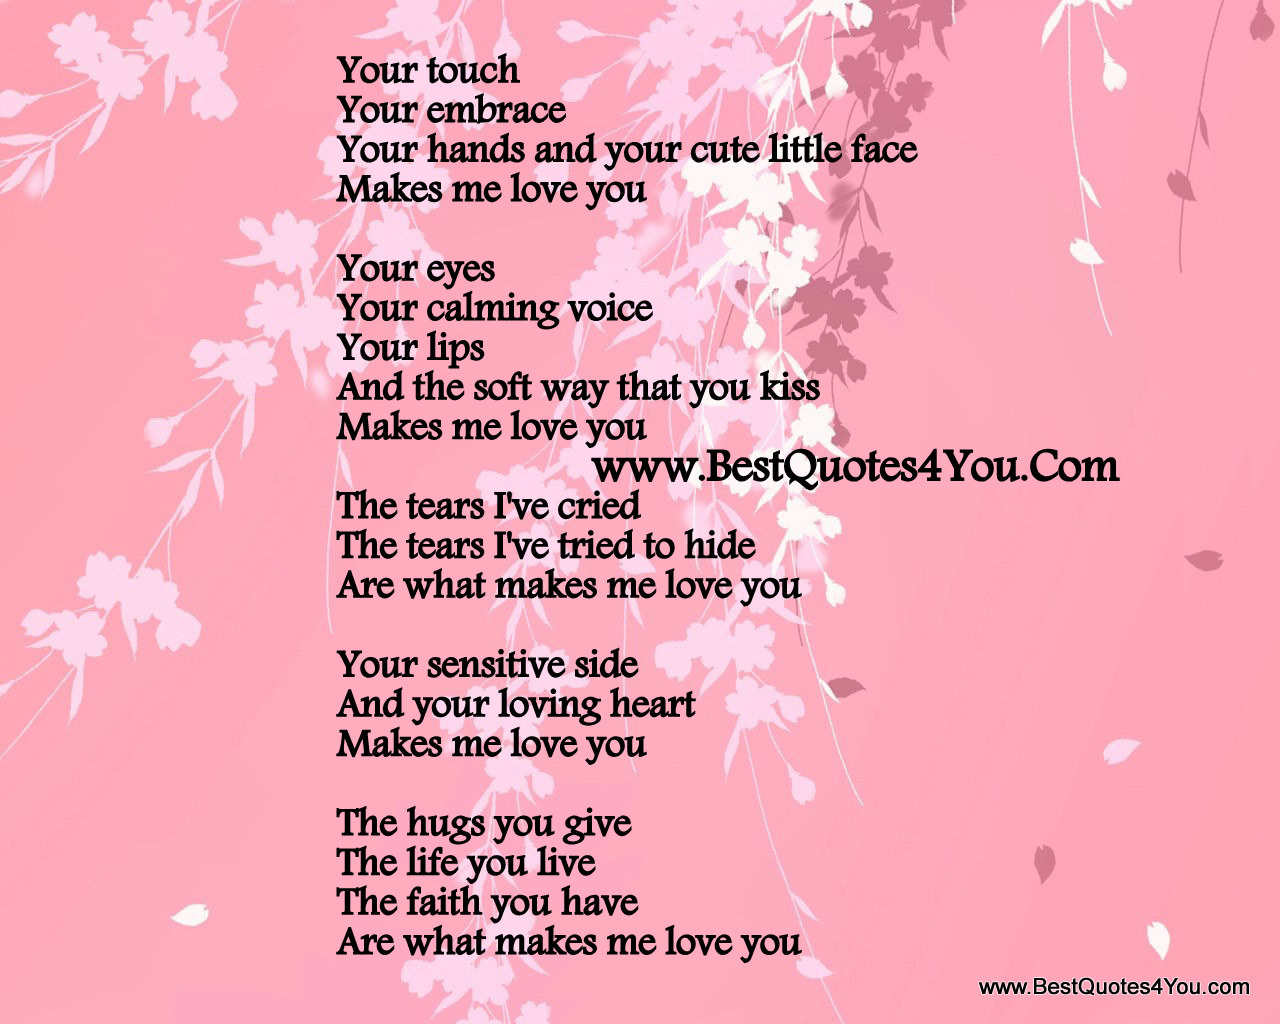 Love your crush short poems for cute 12 Short